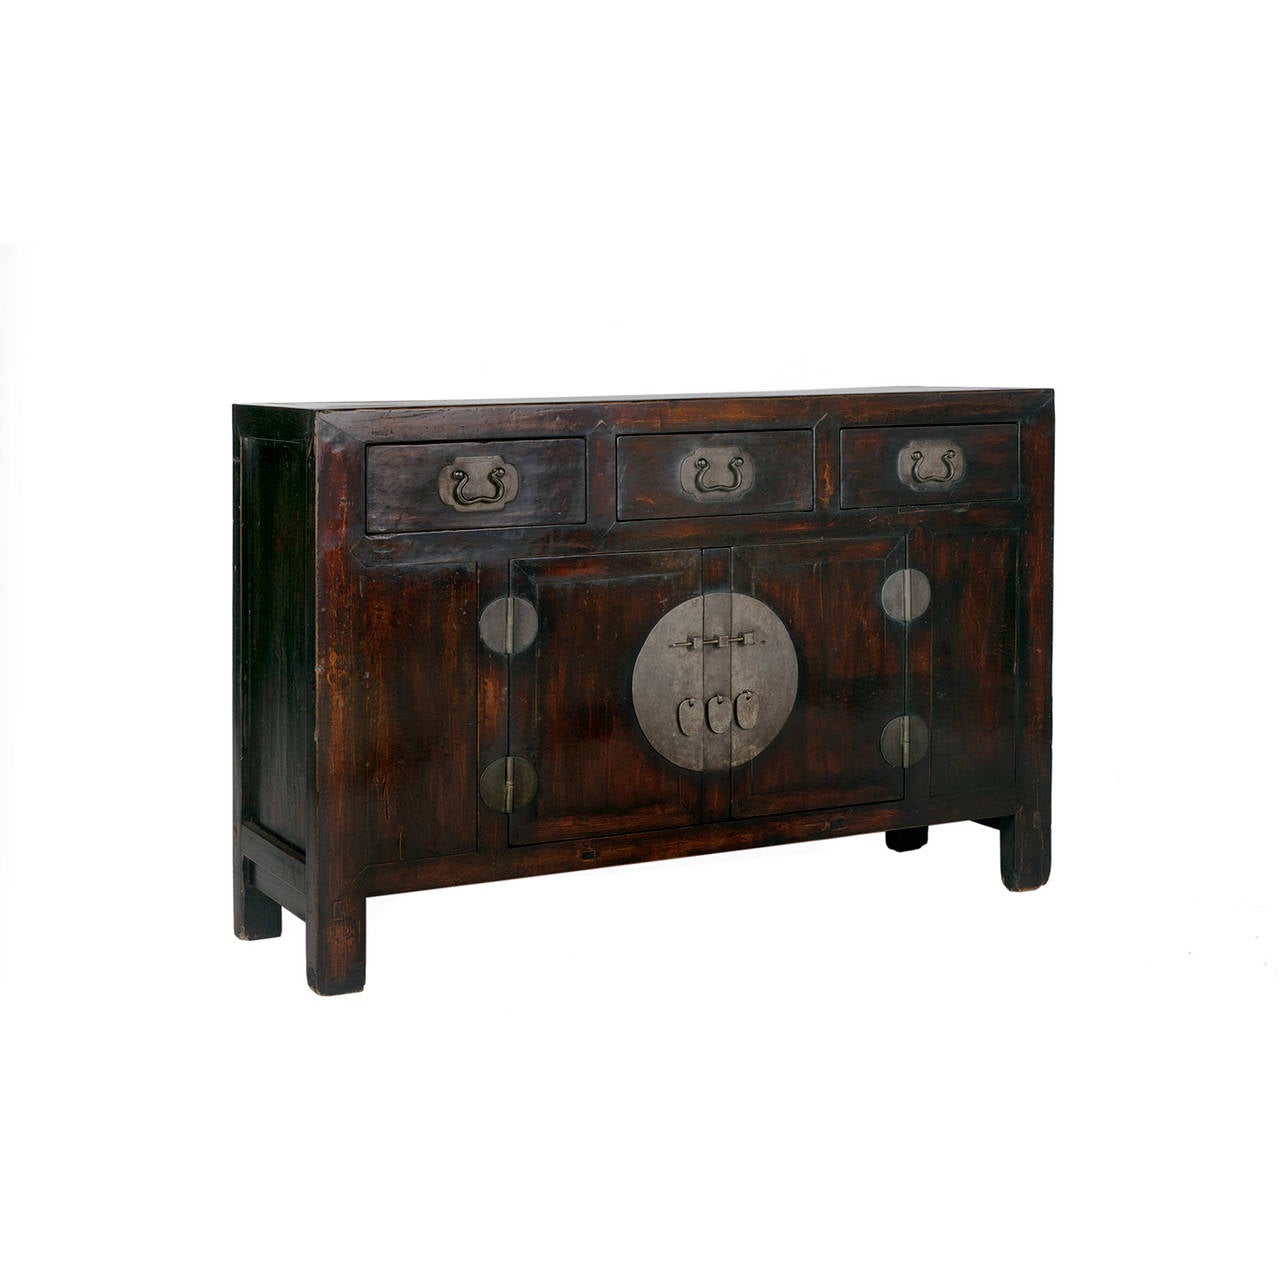 An elmwood coffer from Tianjin , China. This circa 1850 piece features three drawers and two folding doors, decorated with brass hardware.